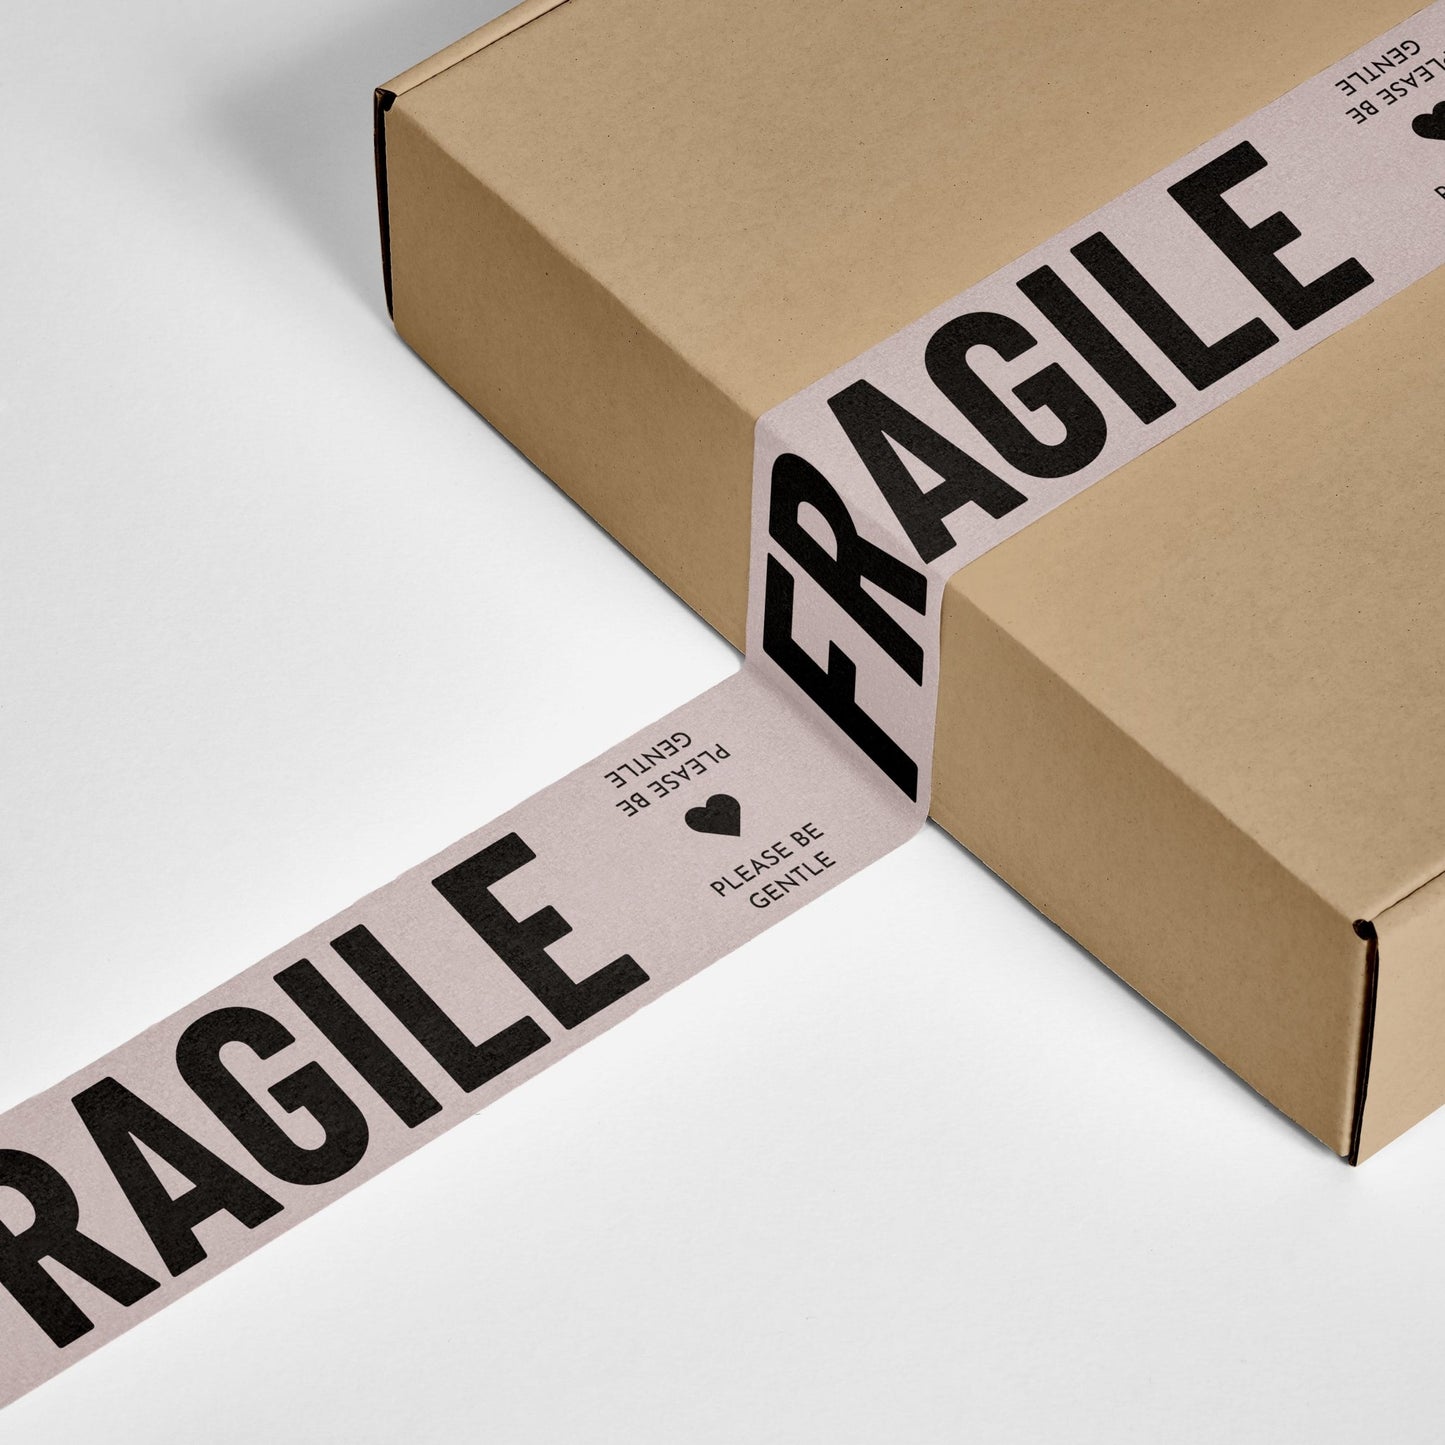 Cream and black 'Fragile, Please Be Gentle' printed shipping tape on a securely sealed box.